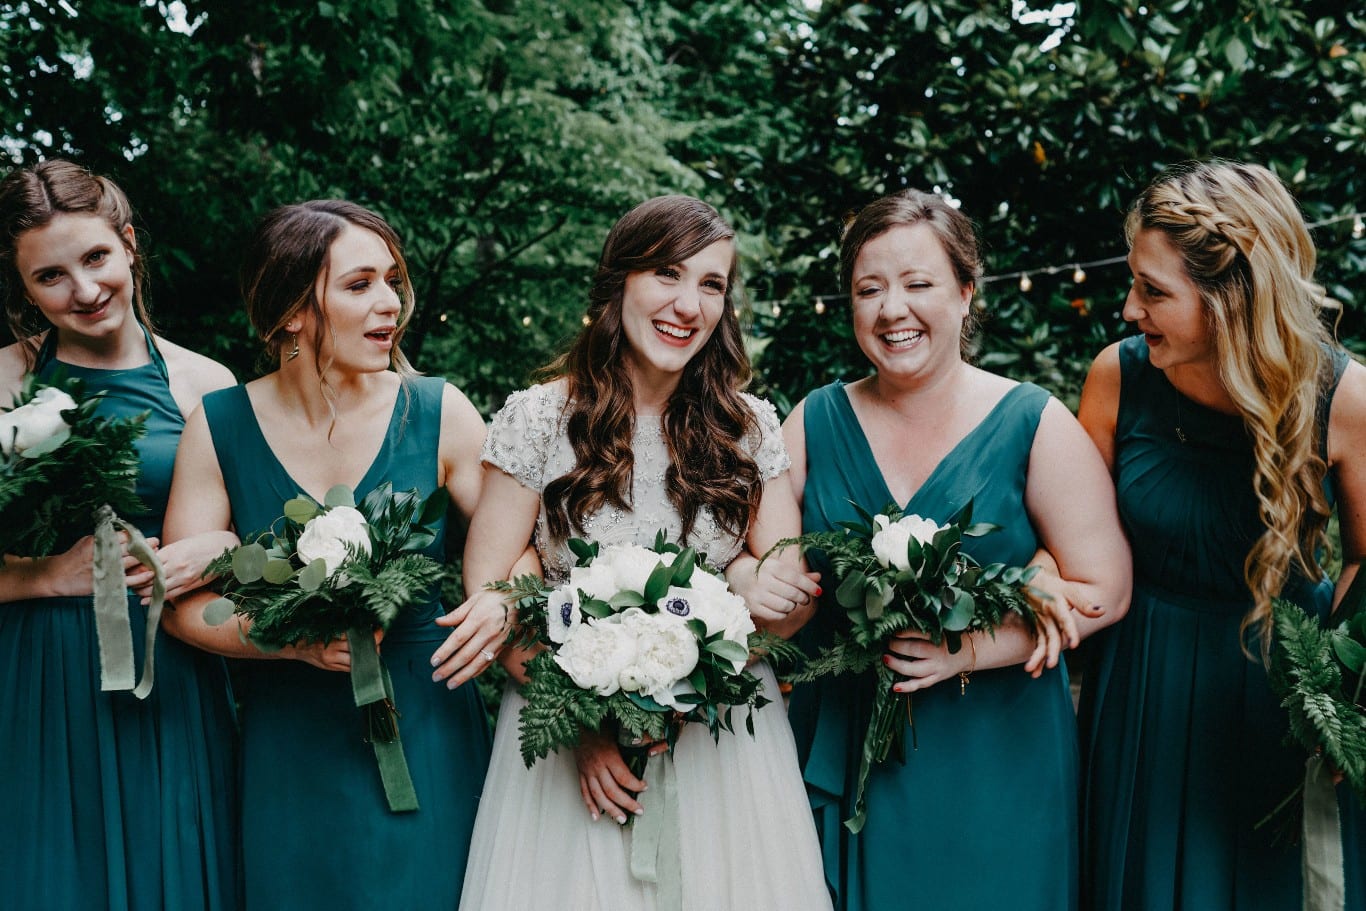 A Vintage Modern Garden Wedding in Green and White | May 27th ...